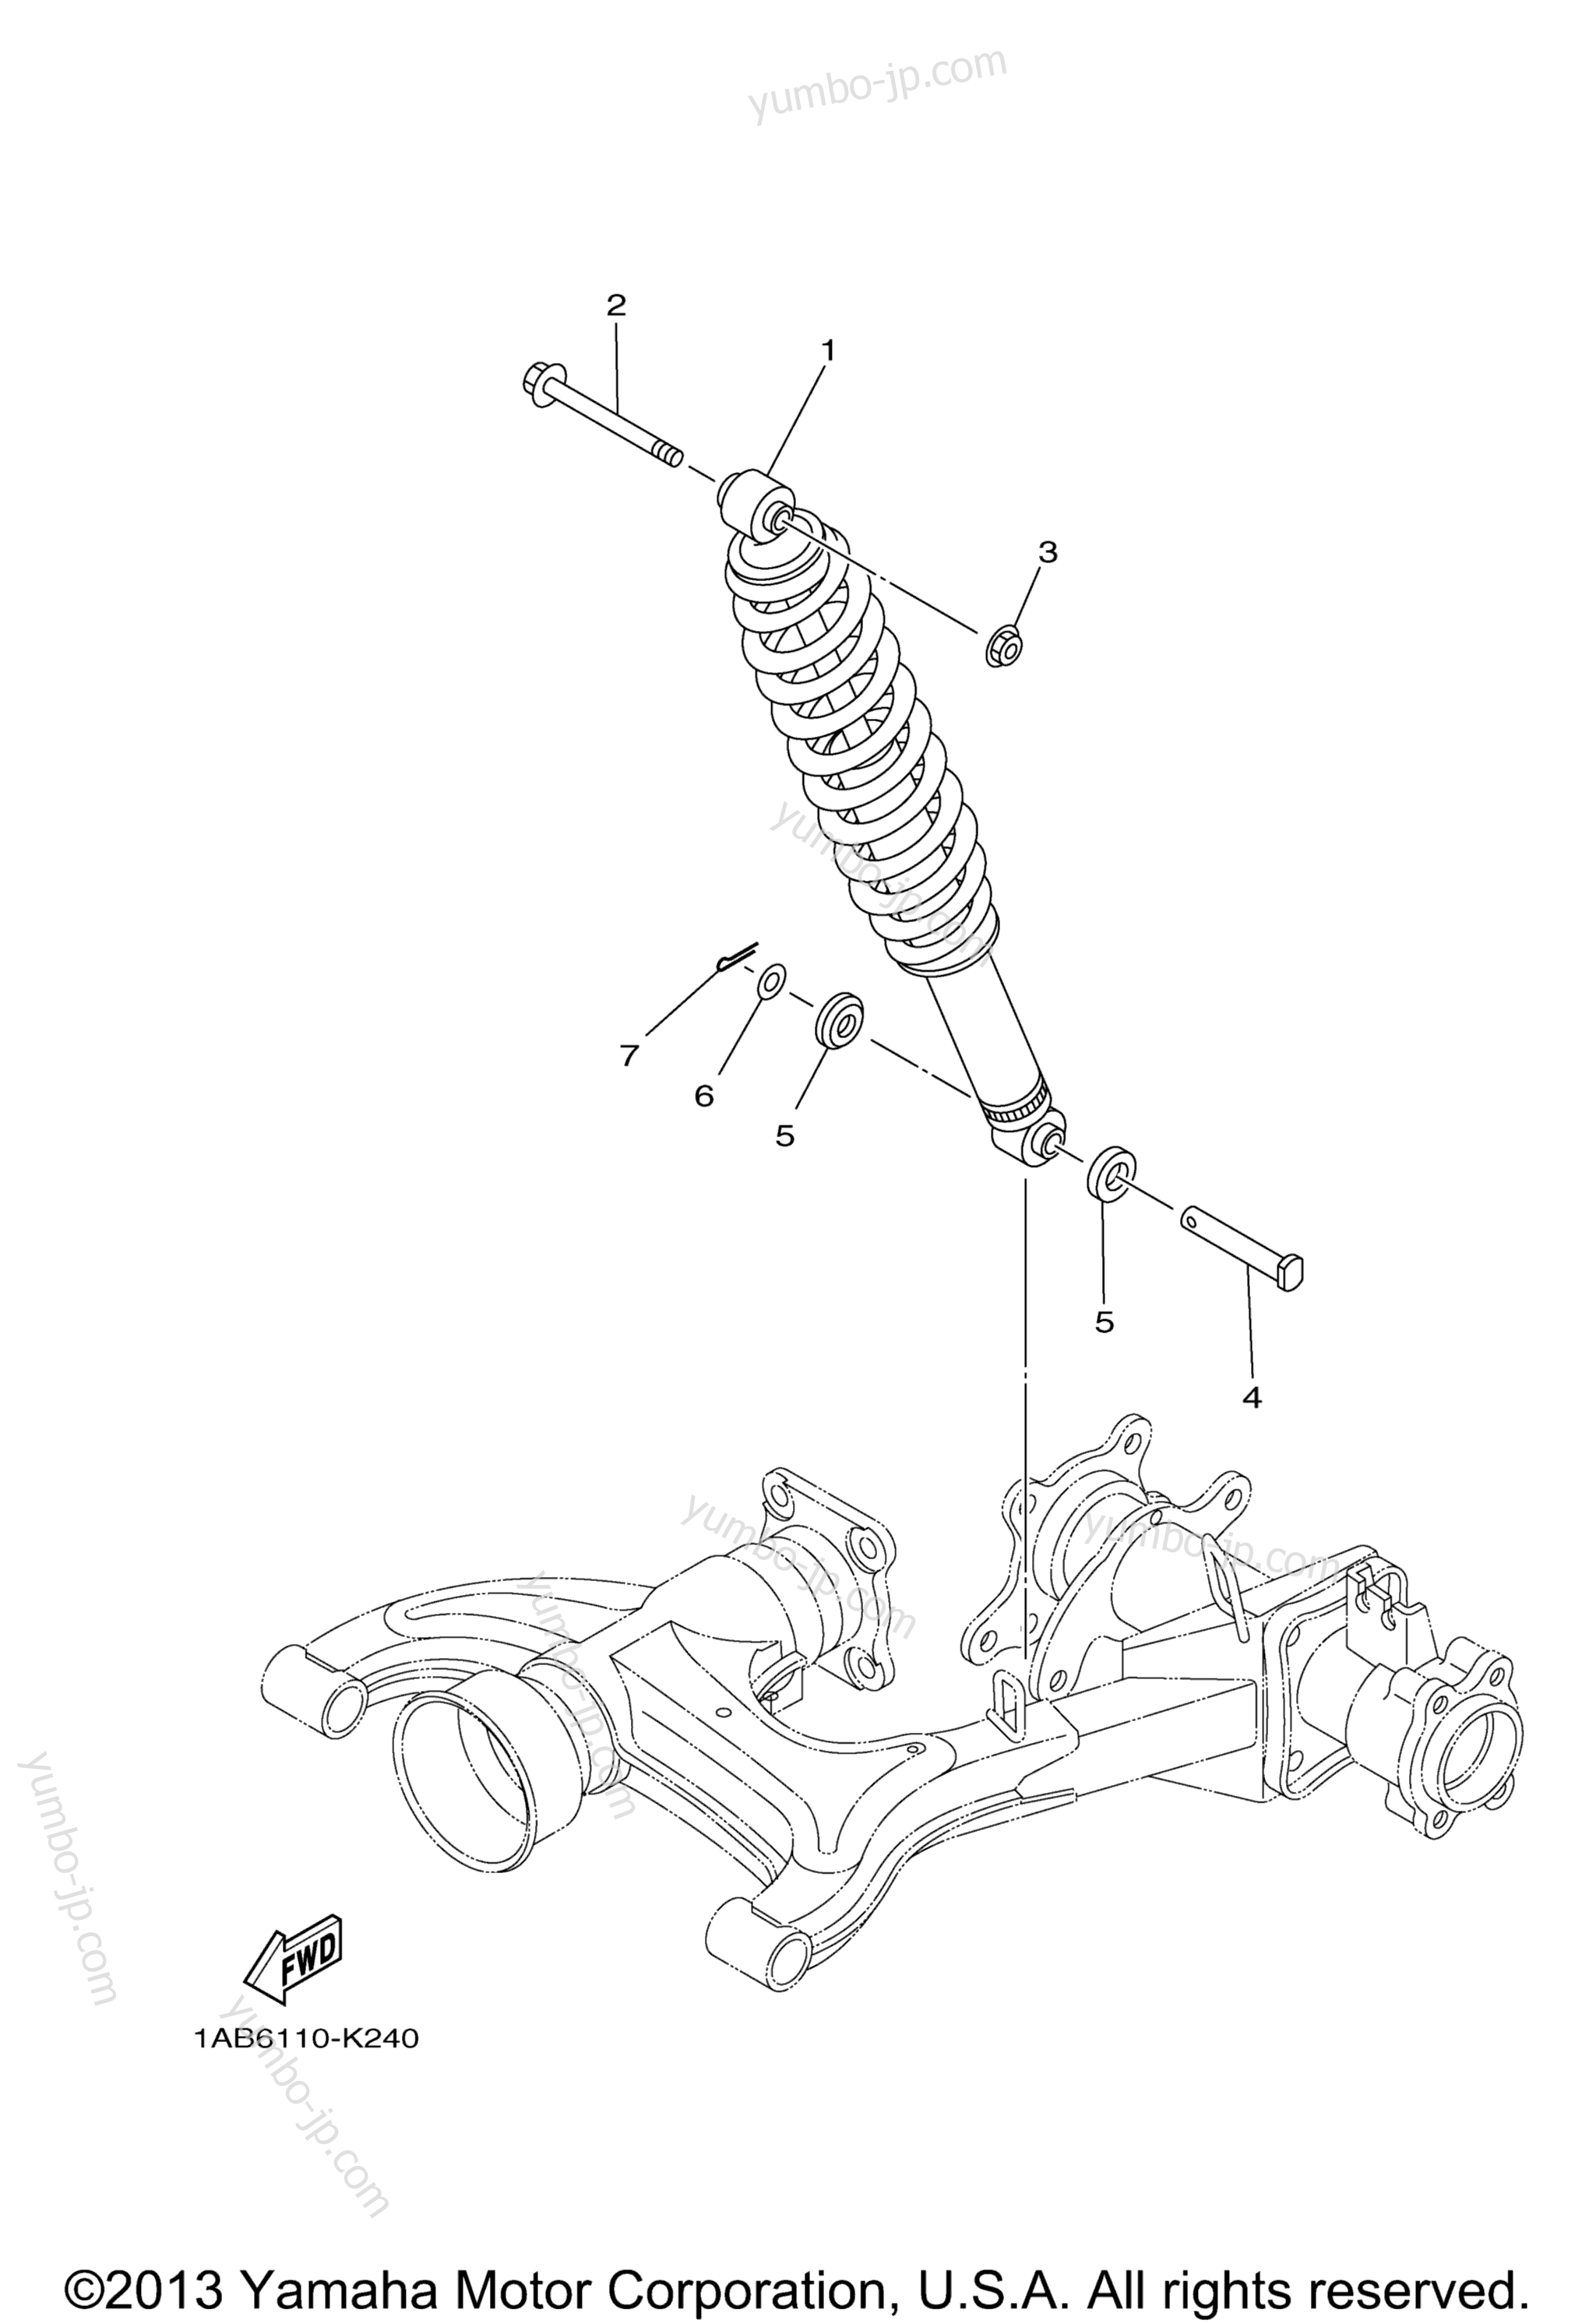 Rear Suspension for ATVs YAMAHA GRIZZLY 350 4WD (YFM35FGAGR) 2011 year